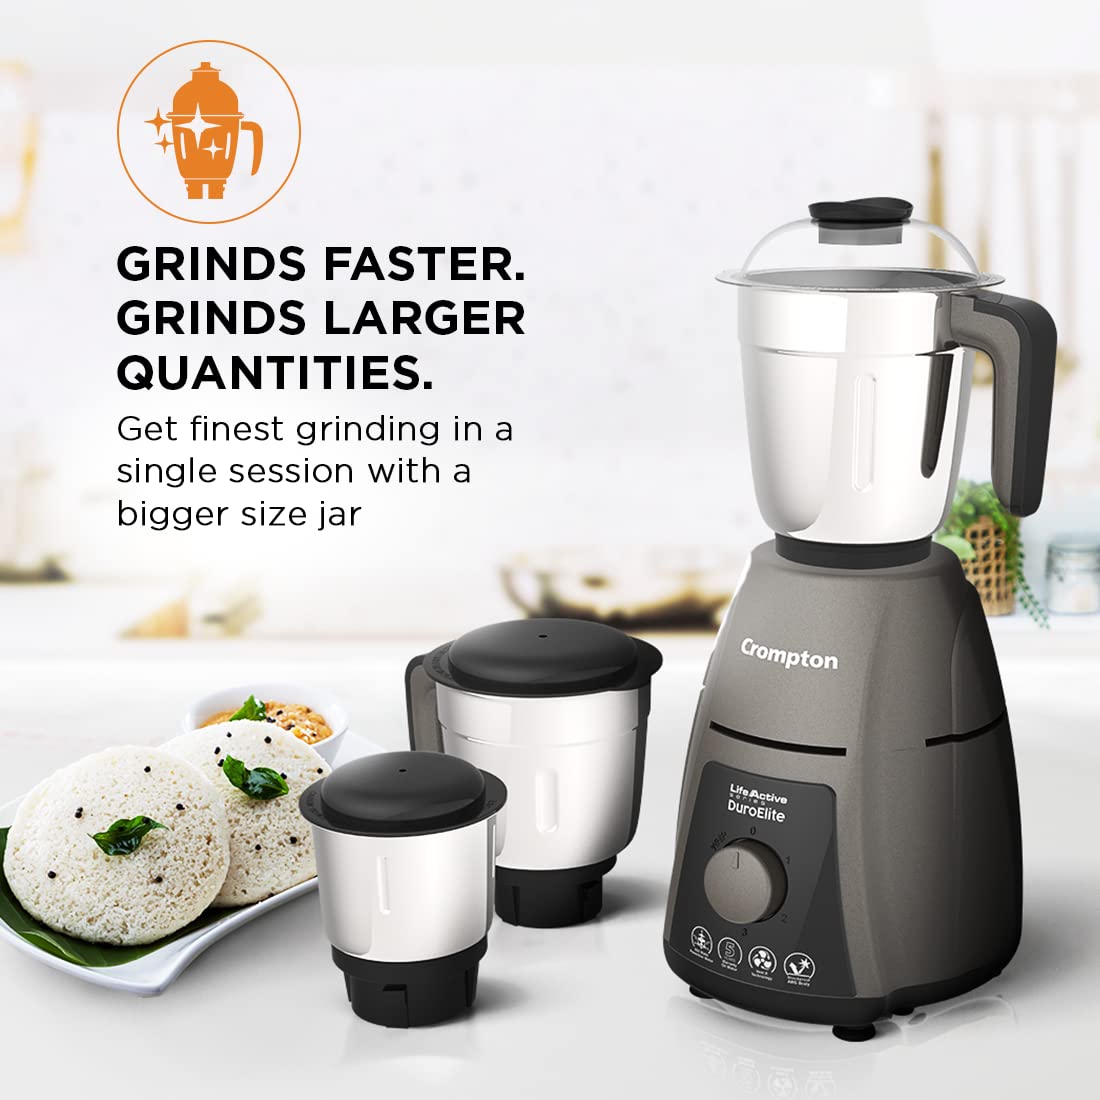 Juicer Mixer Grinder vs Mixer Grinder: Which is Right for You? - Crompton  Greaves Consumer Electricals Limited